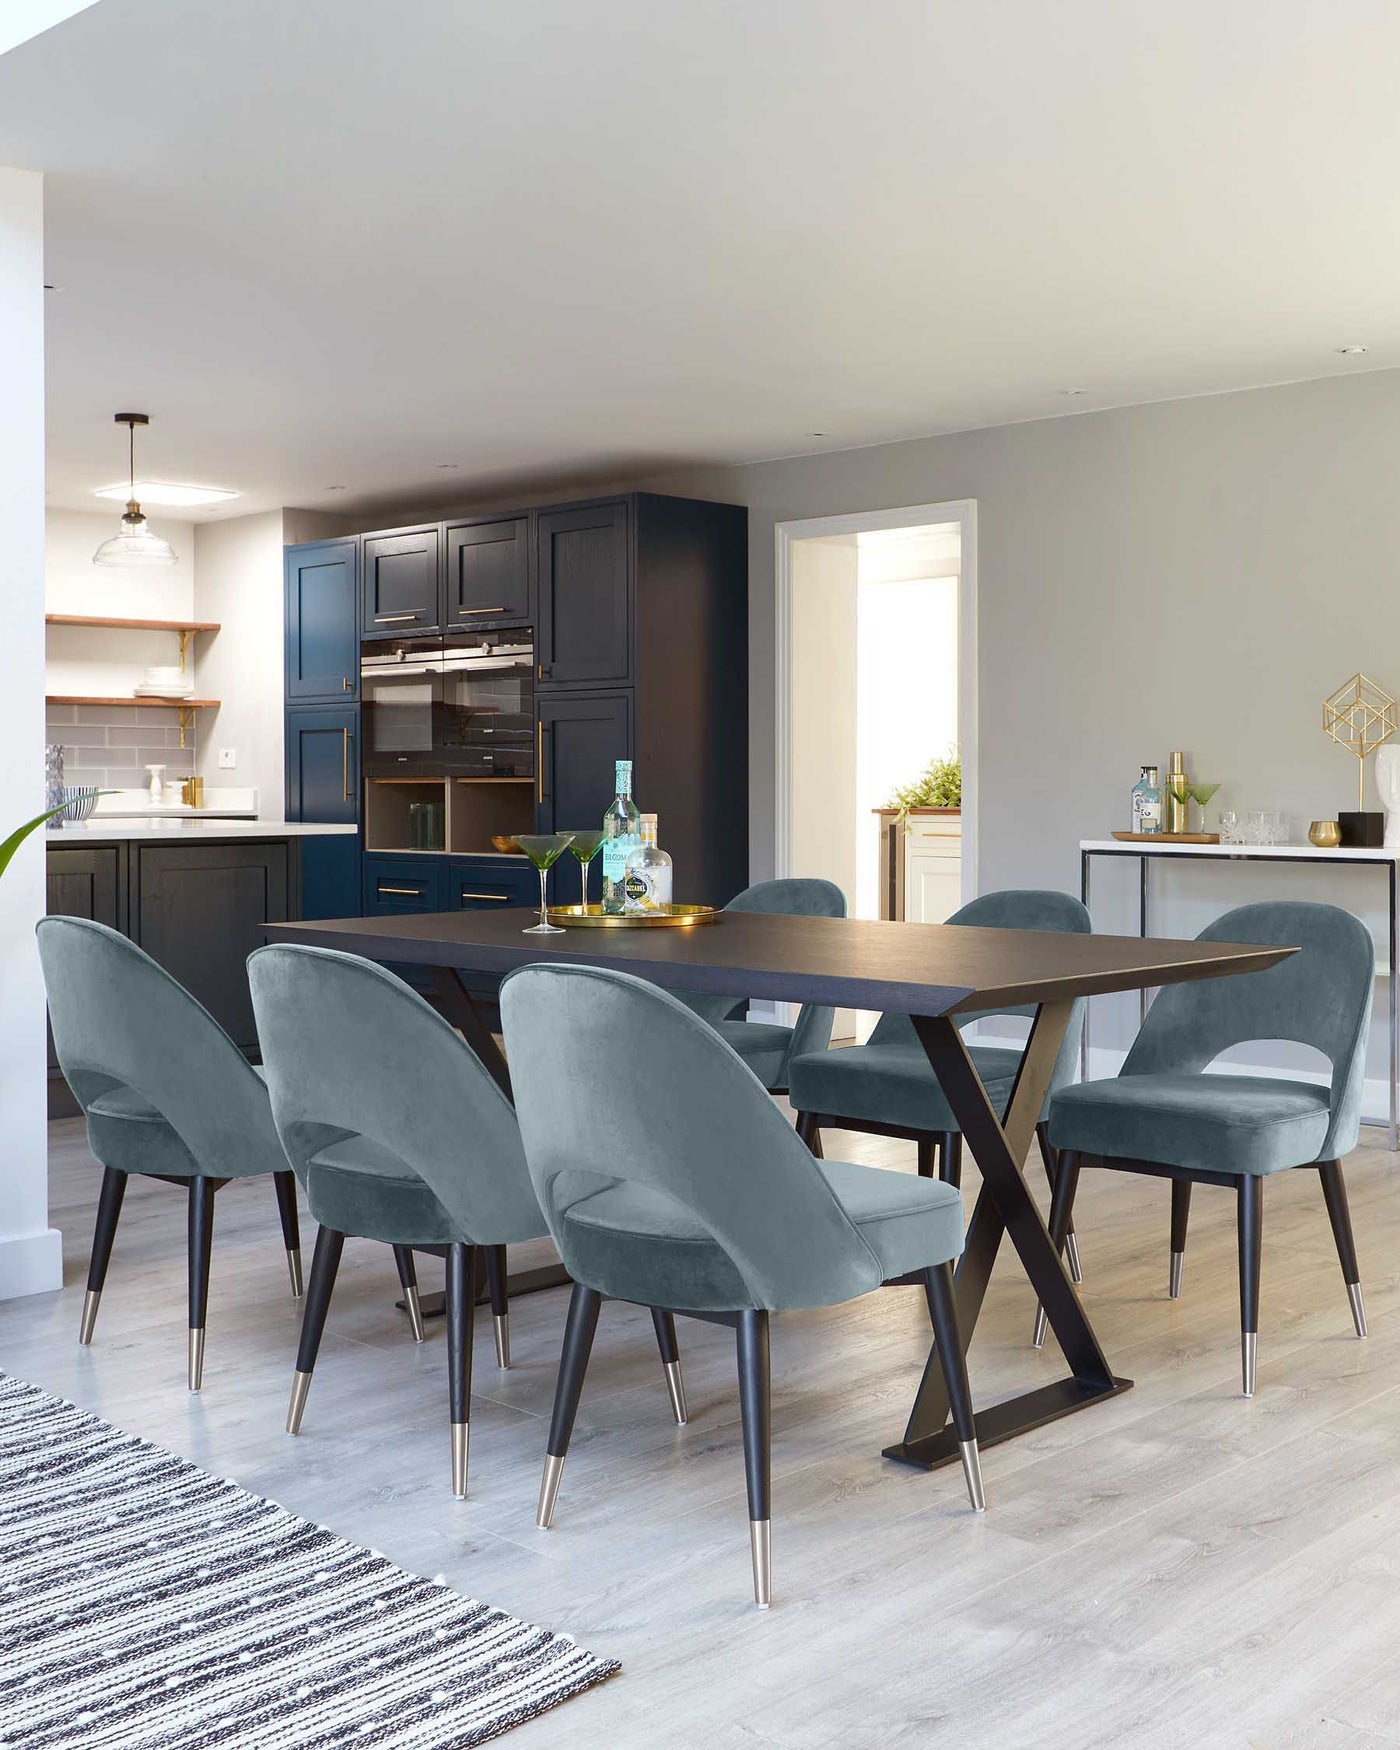 Modern dining room featuring a dark wood rectangular table with a unique X-shaped base design and metal tips, surrounded by six plush velvet dining chairs in a soft grey colour with sleek black wooden legs tipped with metallic accents. The room is styled with a light hardwood floor and a neutral colour scheme.